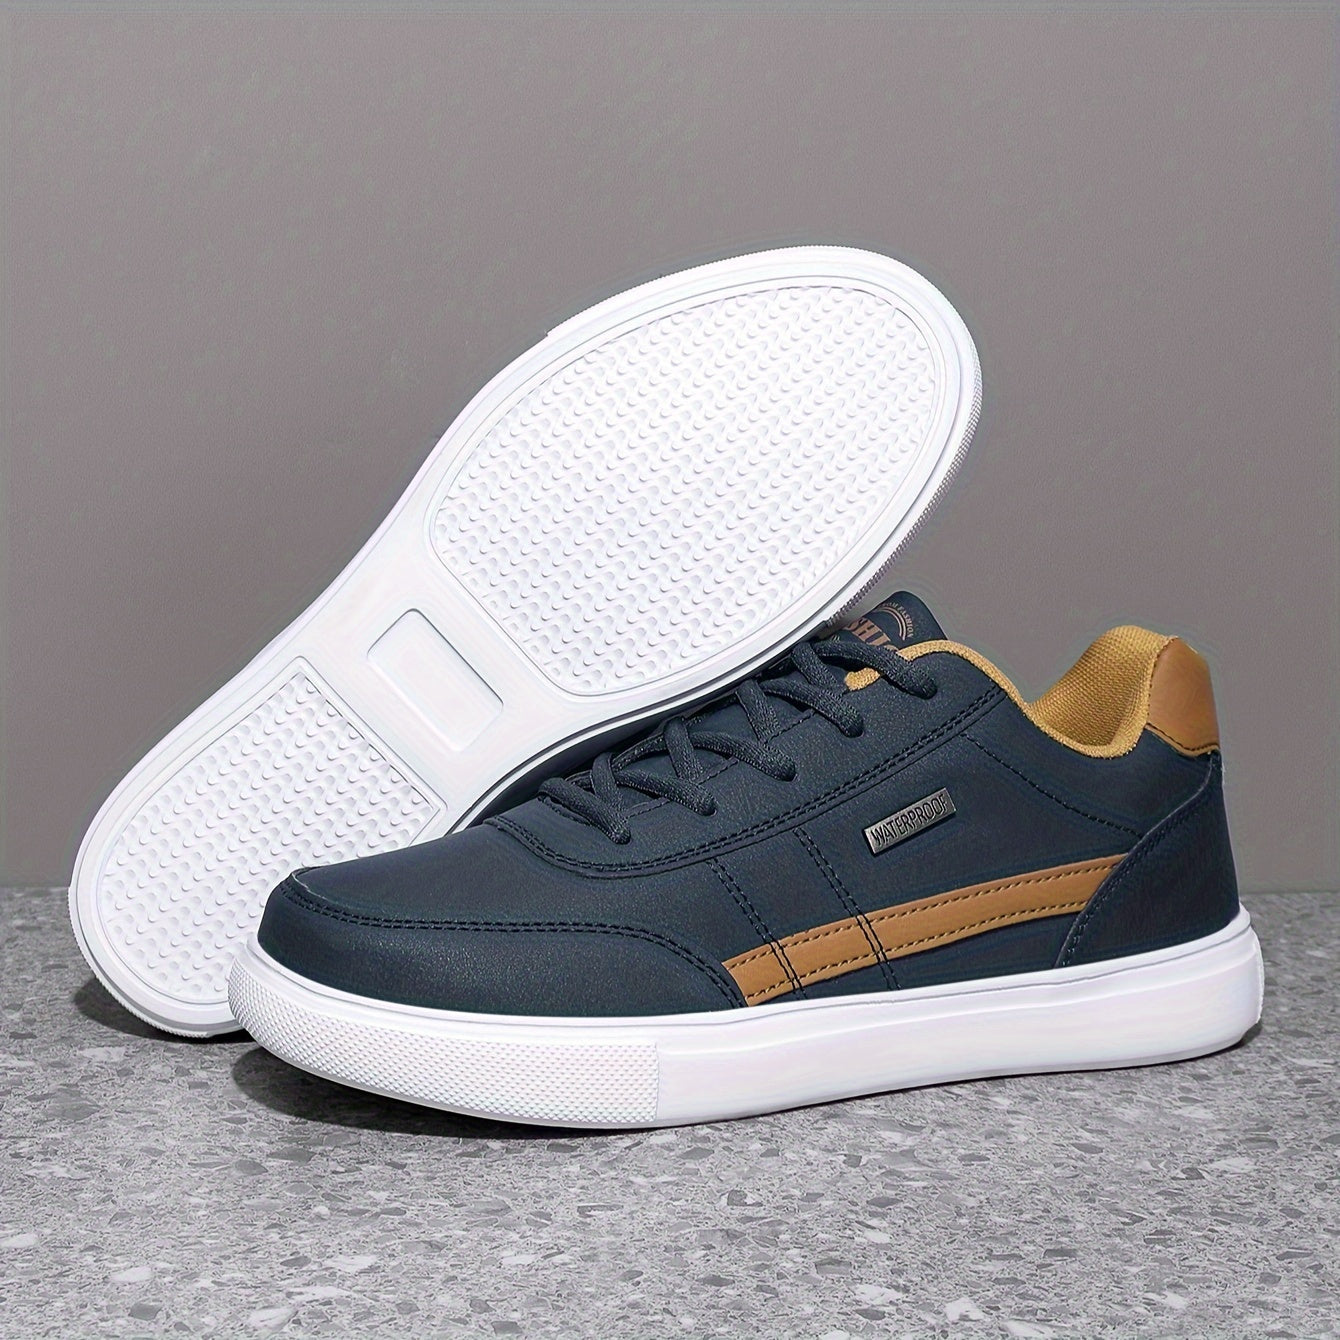 PLUS SIZE Men's Trendy Skate Shoes - Comfy Non-Slip Casual Lace-Up Sneakers for Outdoor Activities